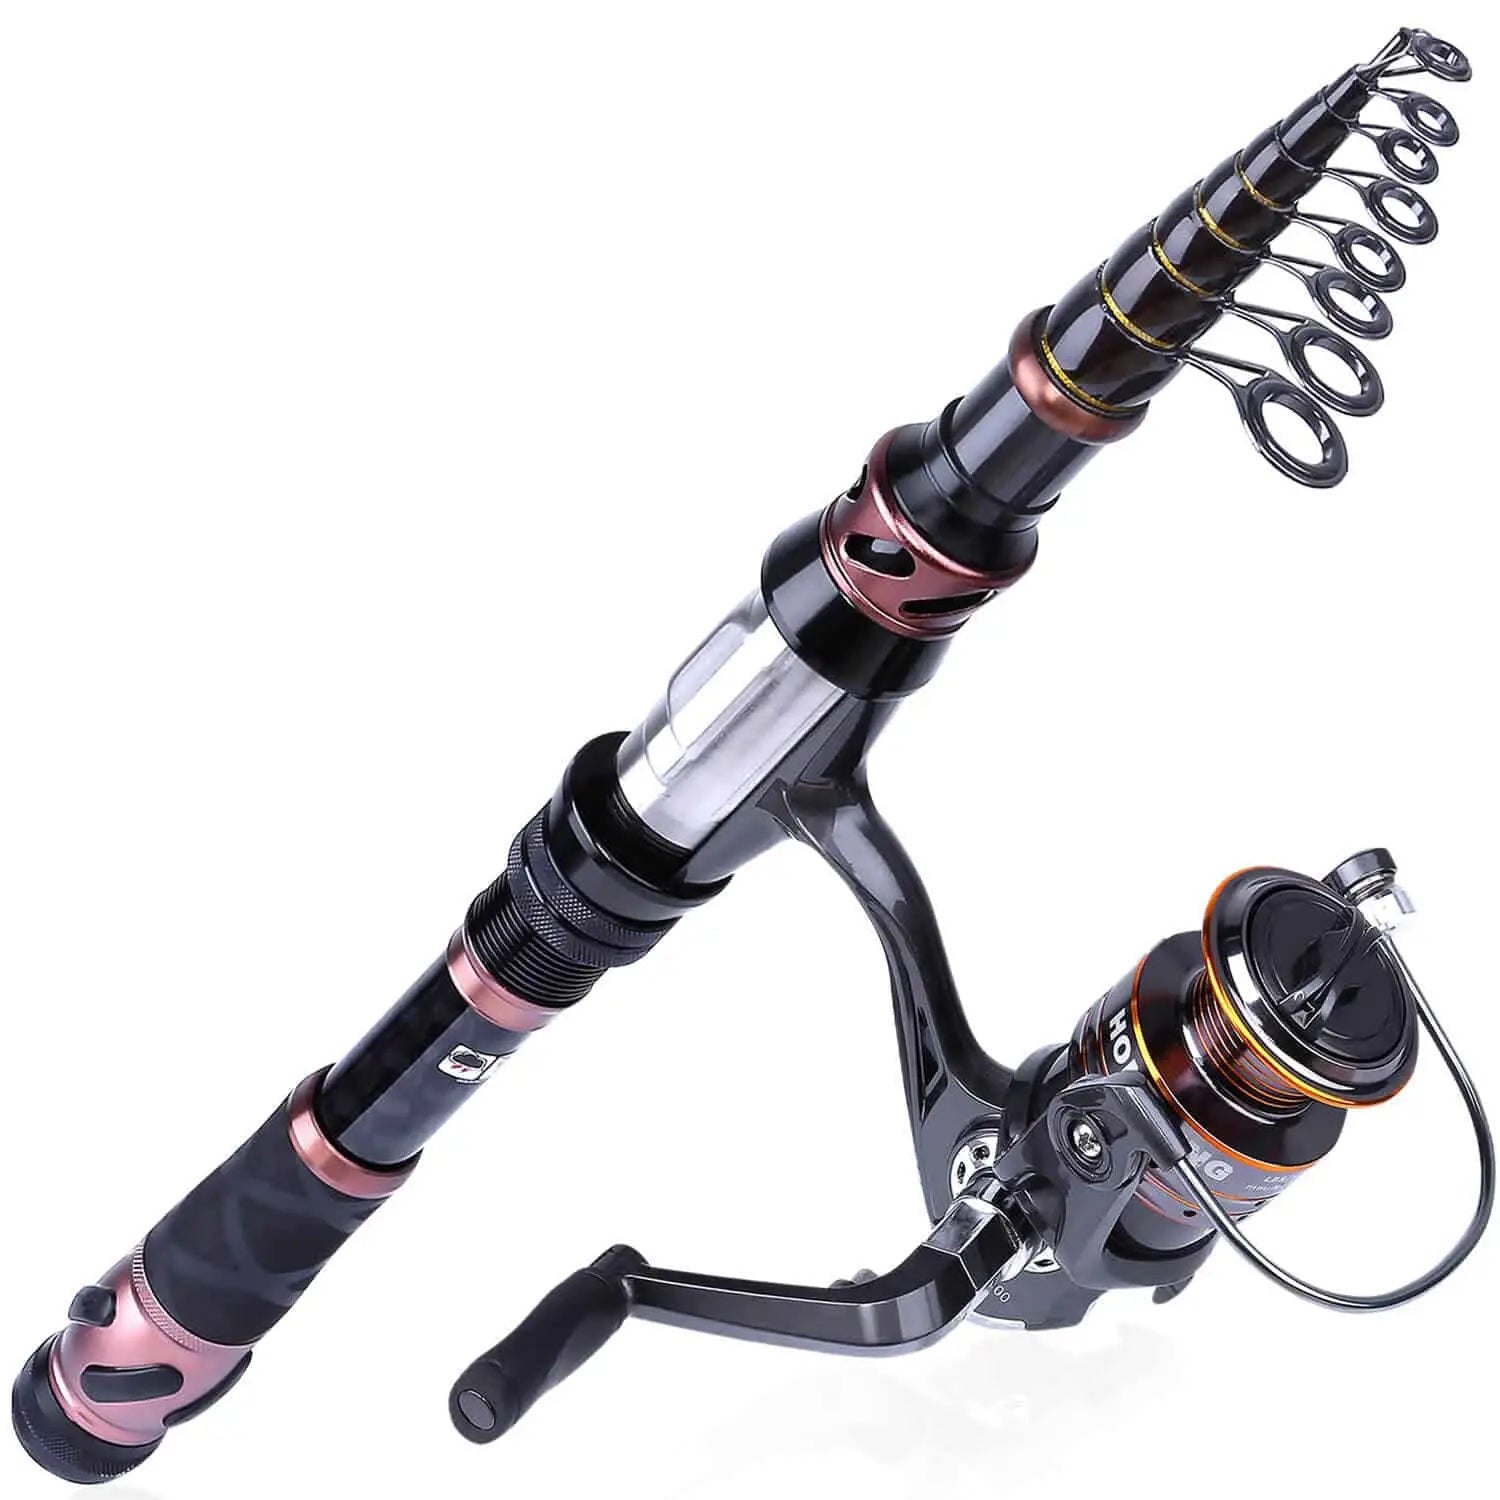 Plusinno Telescopic Fishing Rod And Reel Combo for Beginner with Trave